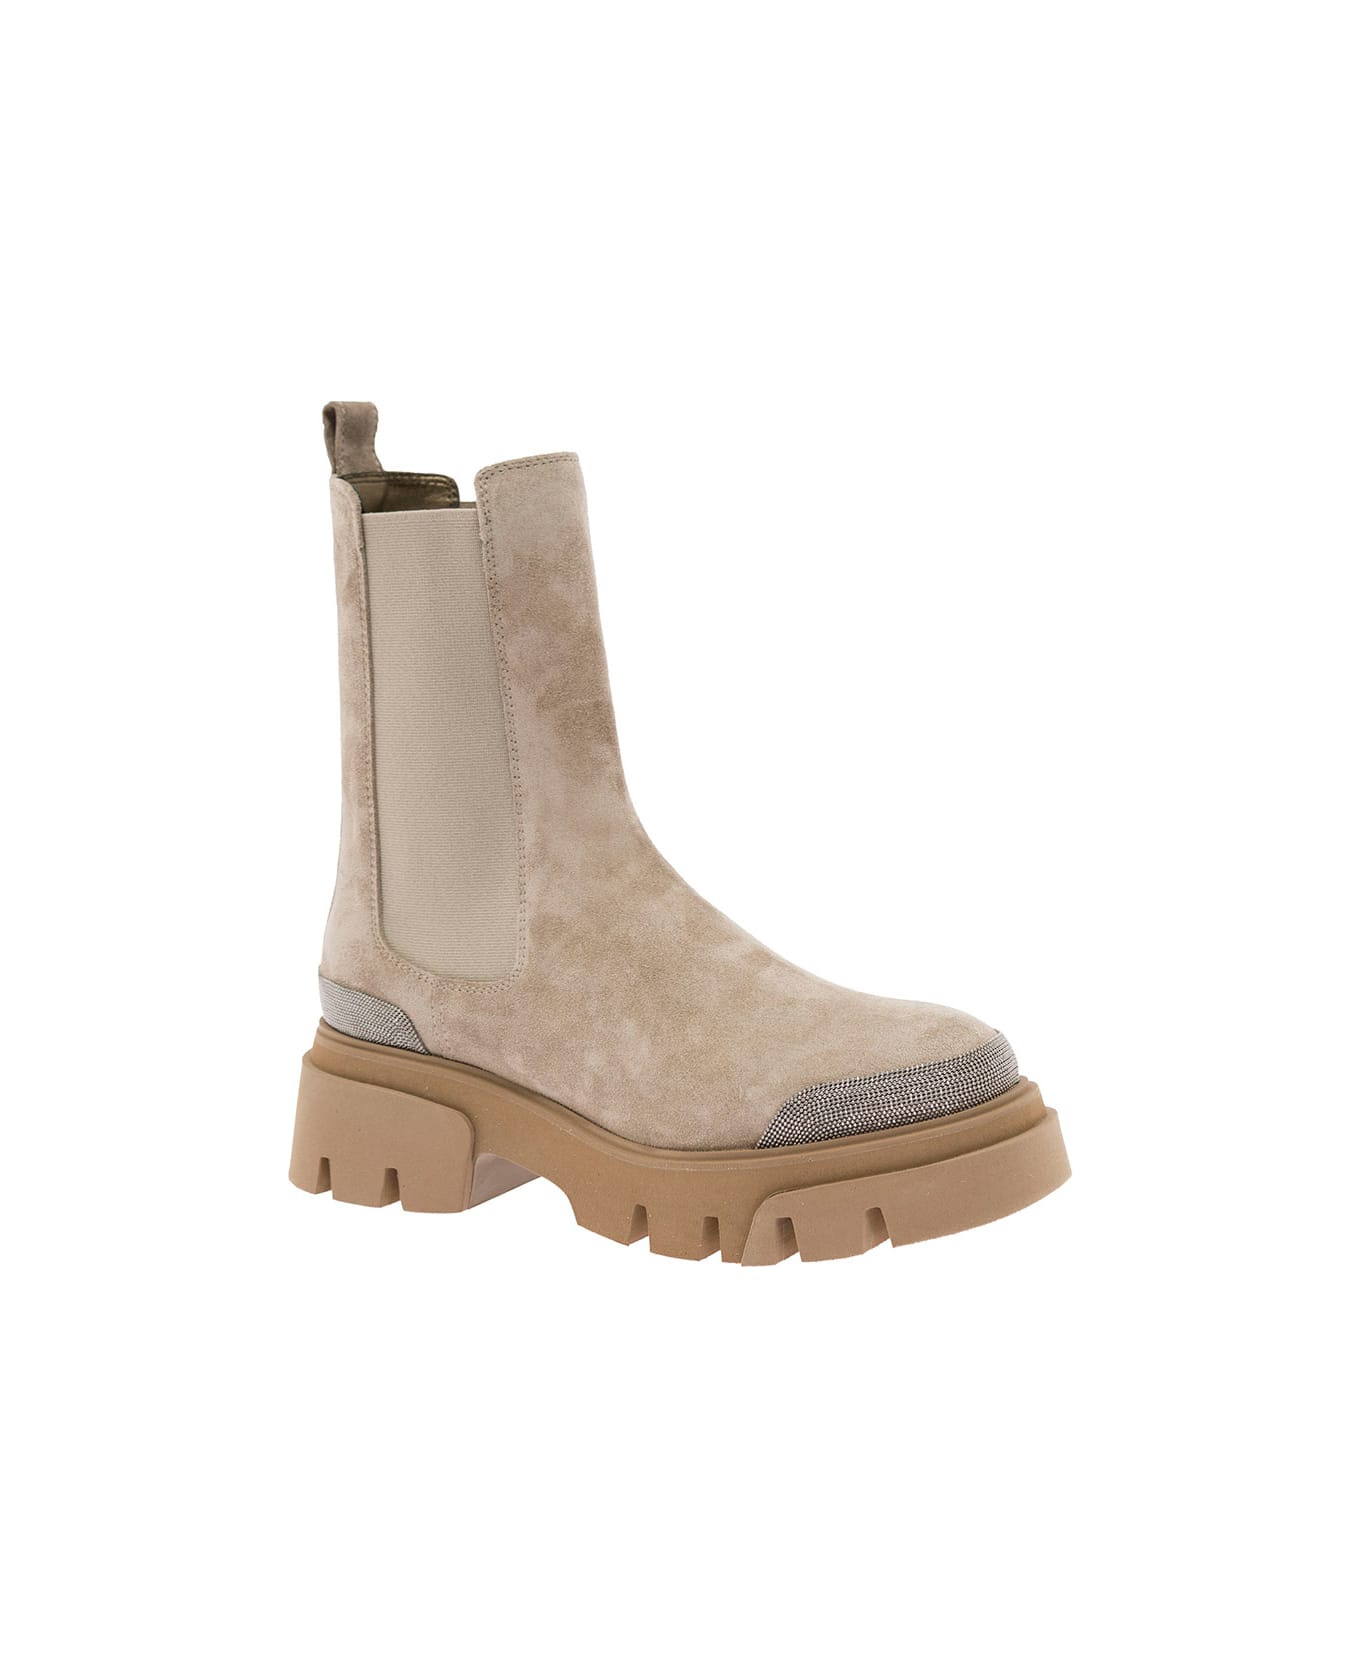 Brunello Cucinelli Taupe Ankle Boots In Suede With Monile Embellishment Brunello Cucinelli Woman - Beige